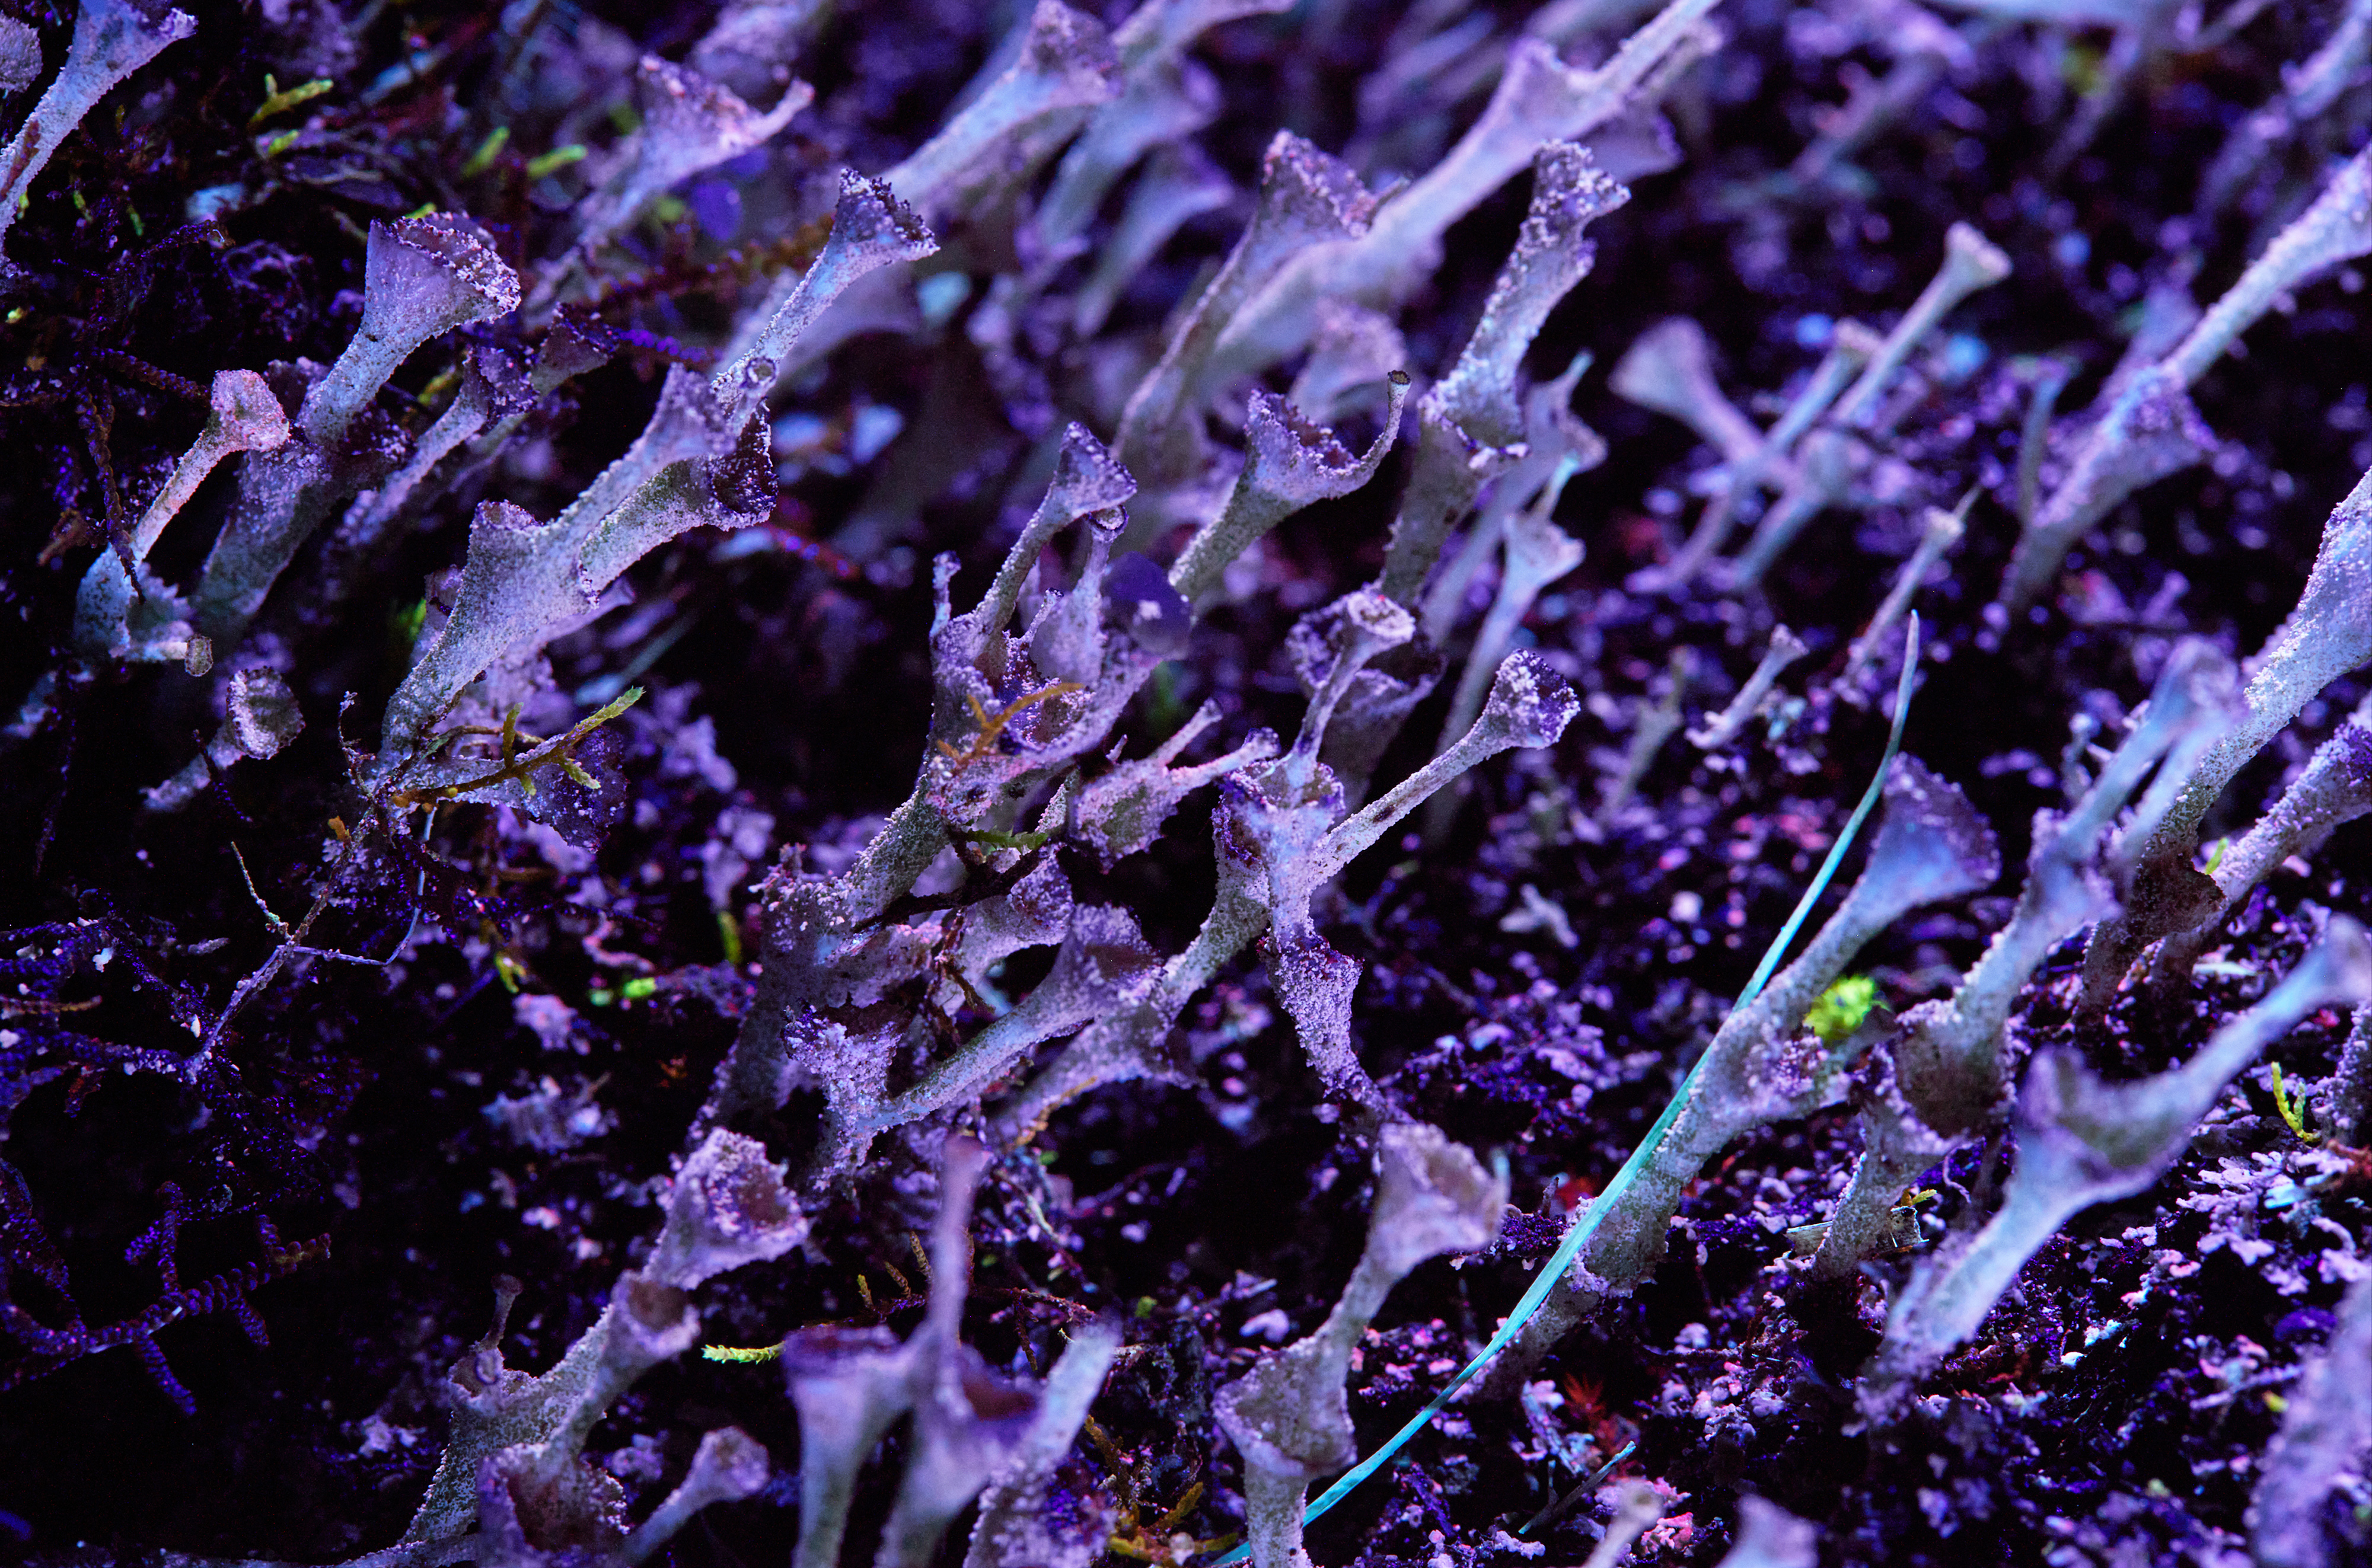 A still taken from a video art installation featuring a burst of tiny vibrant purple flowers.